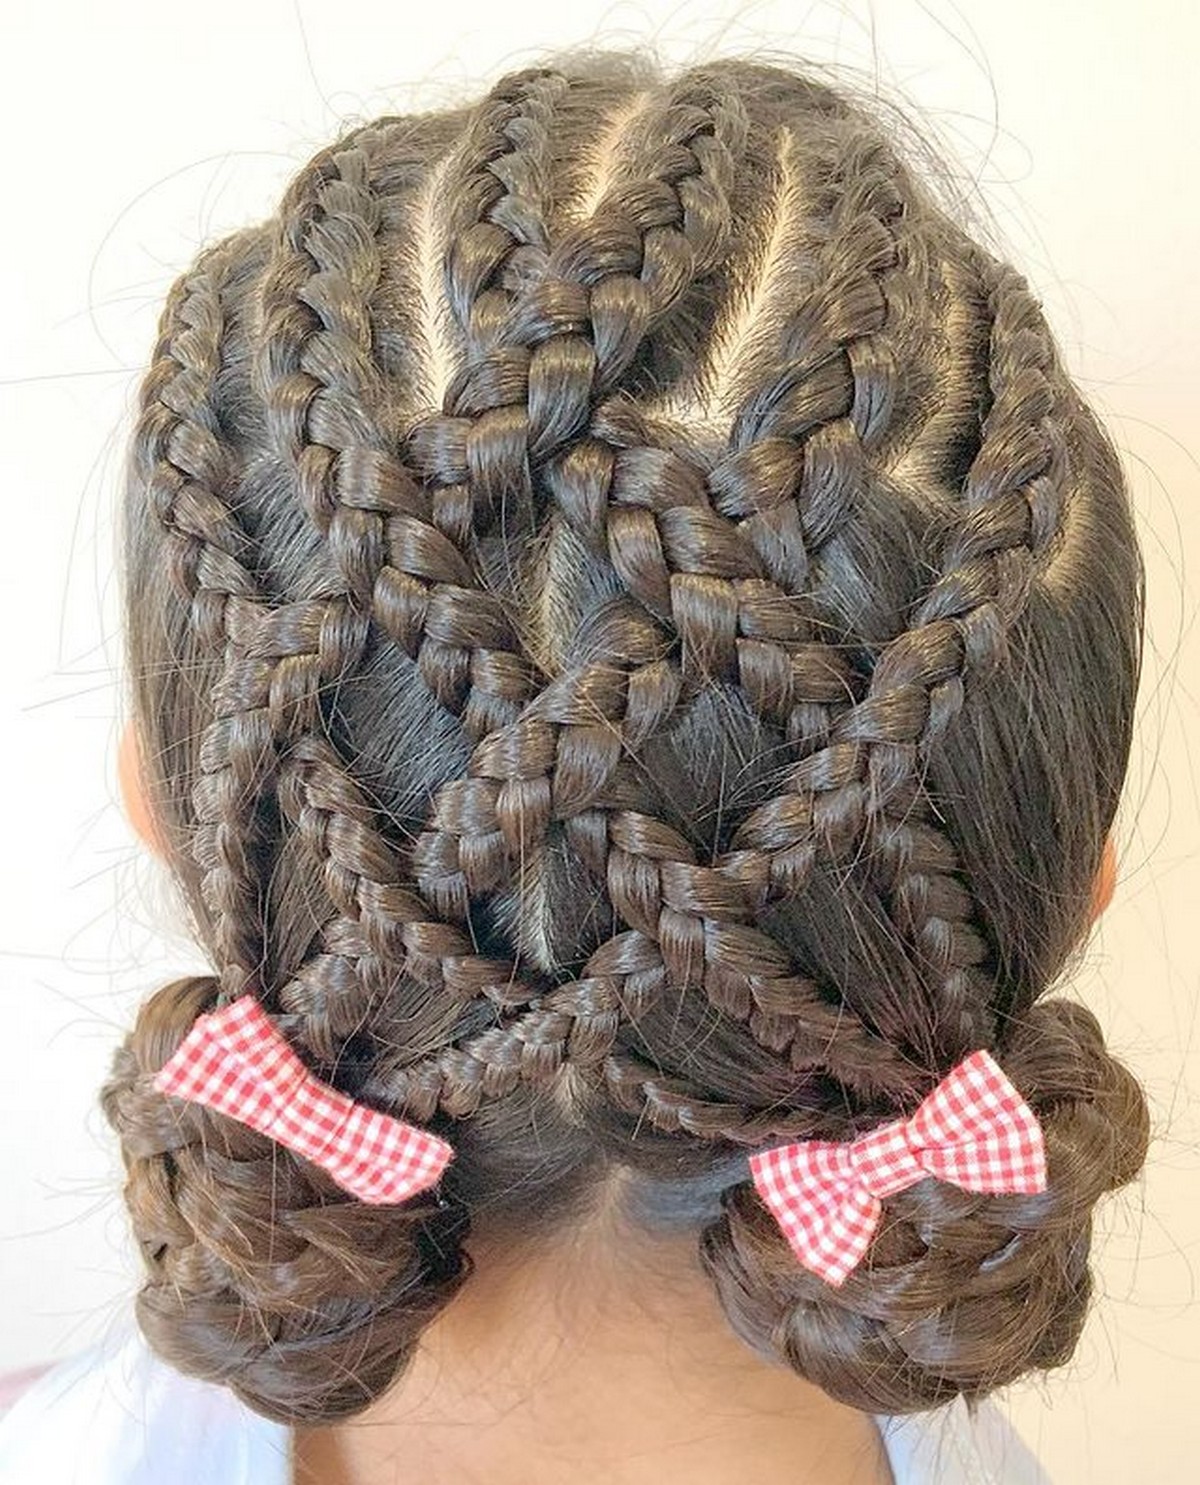 Knitted Braids with Low Braided Pigtails